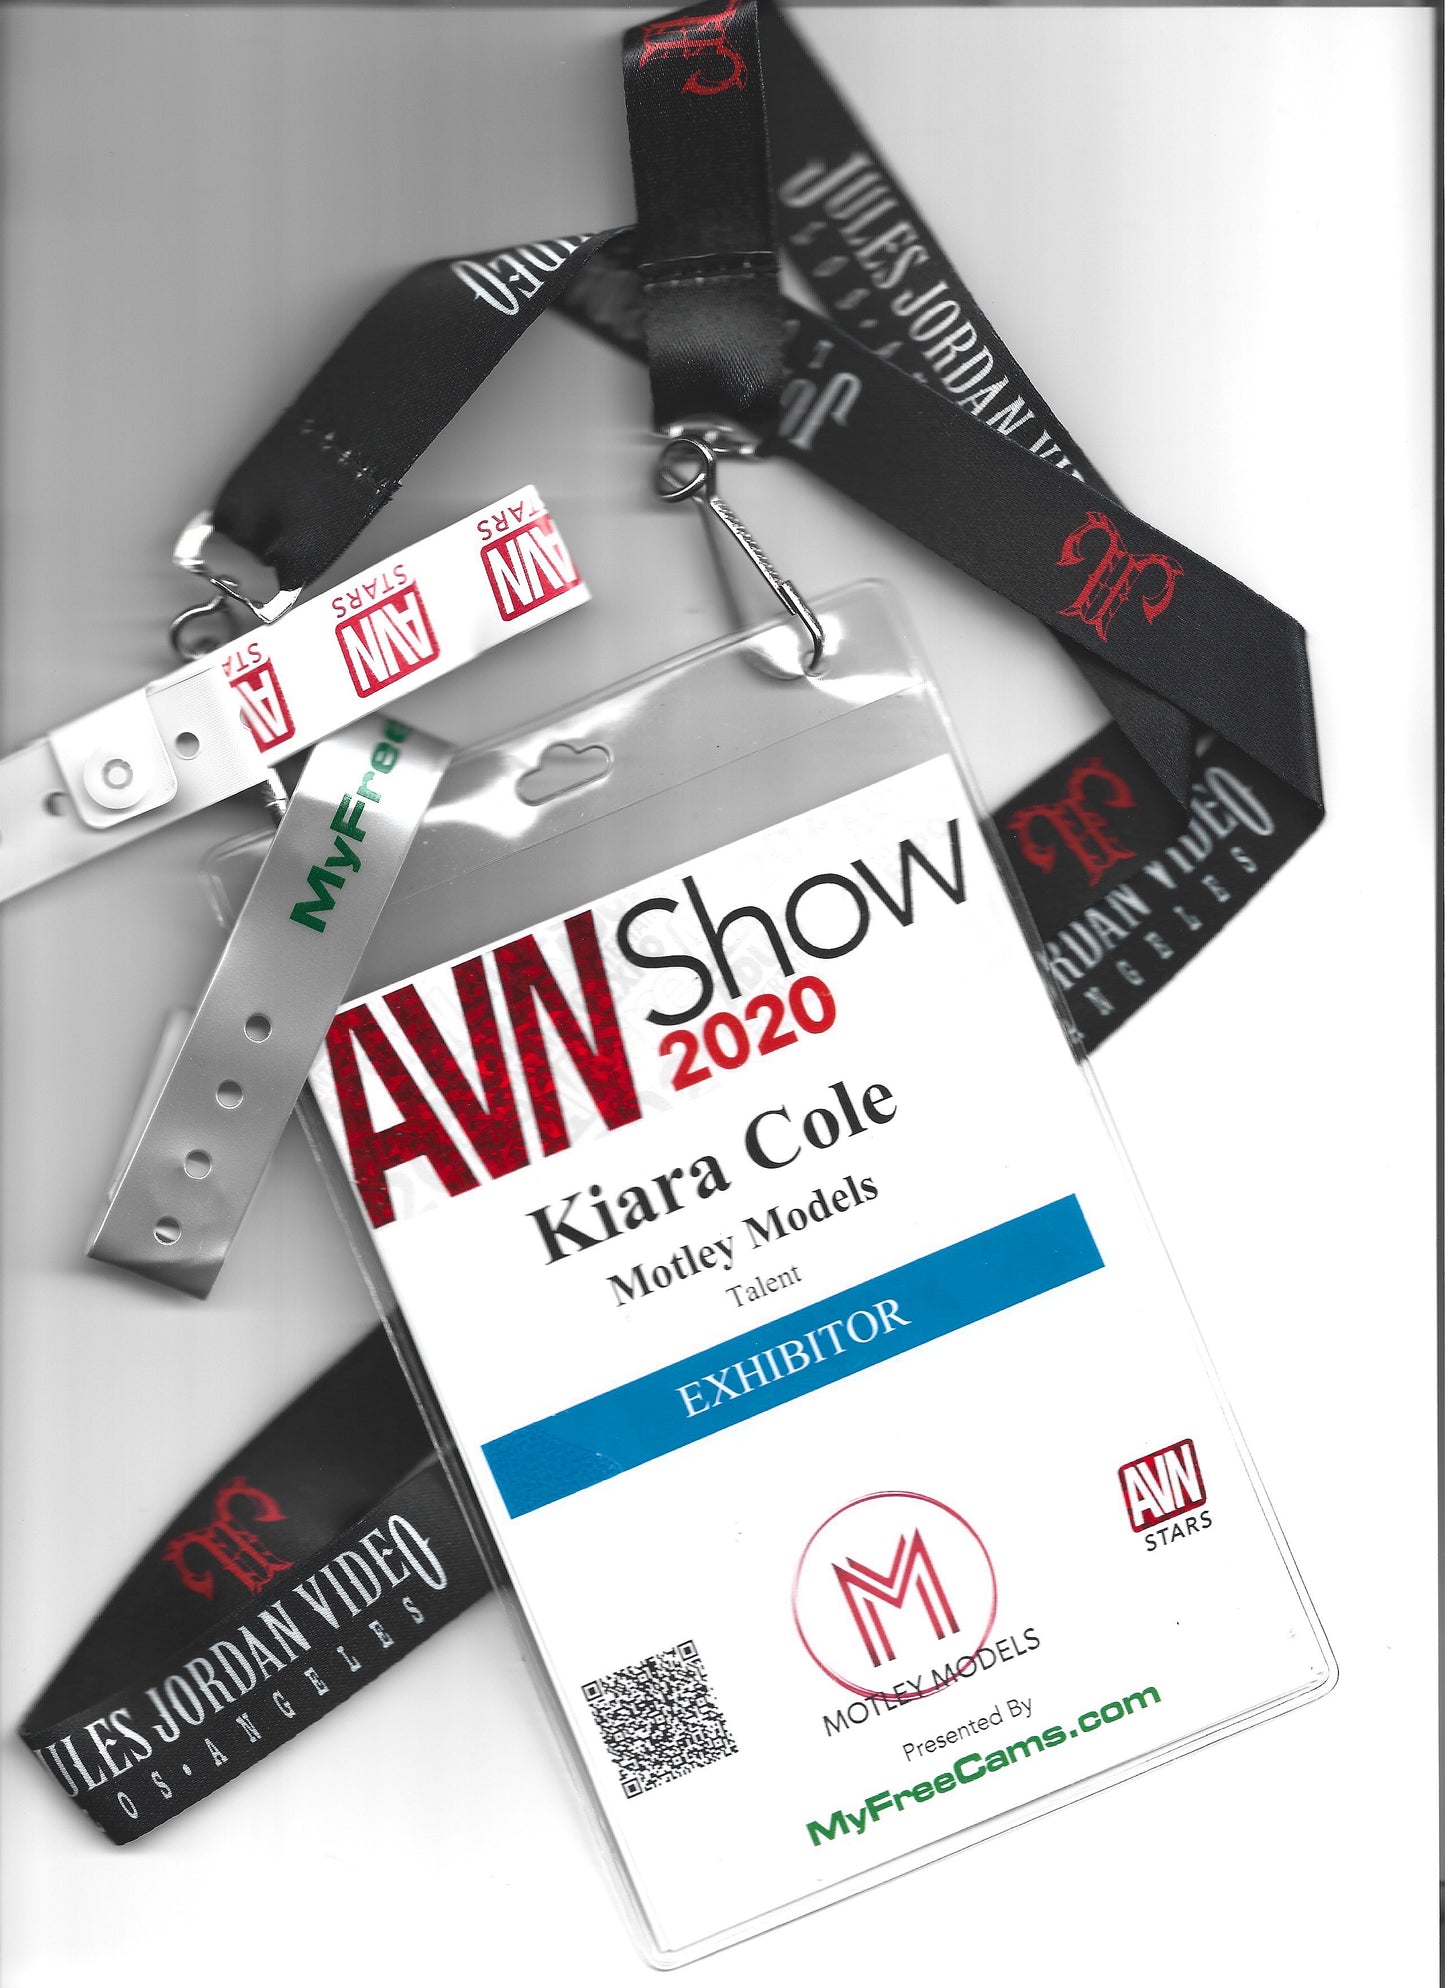 AVN 2020 Lanyard, Convention Badge, Red Carpet Access Pass, and Wristband